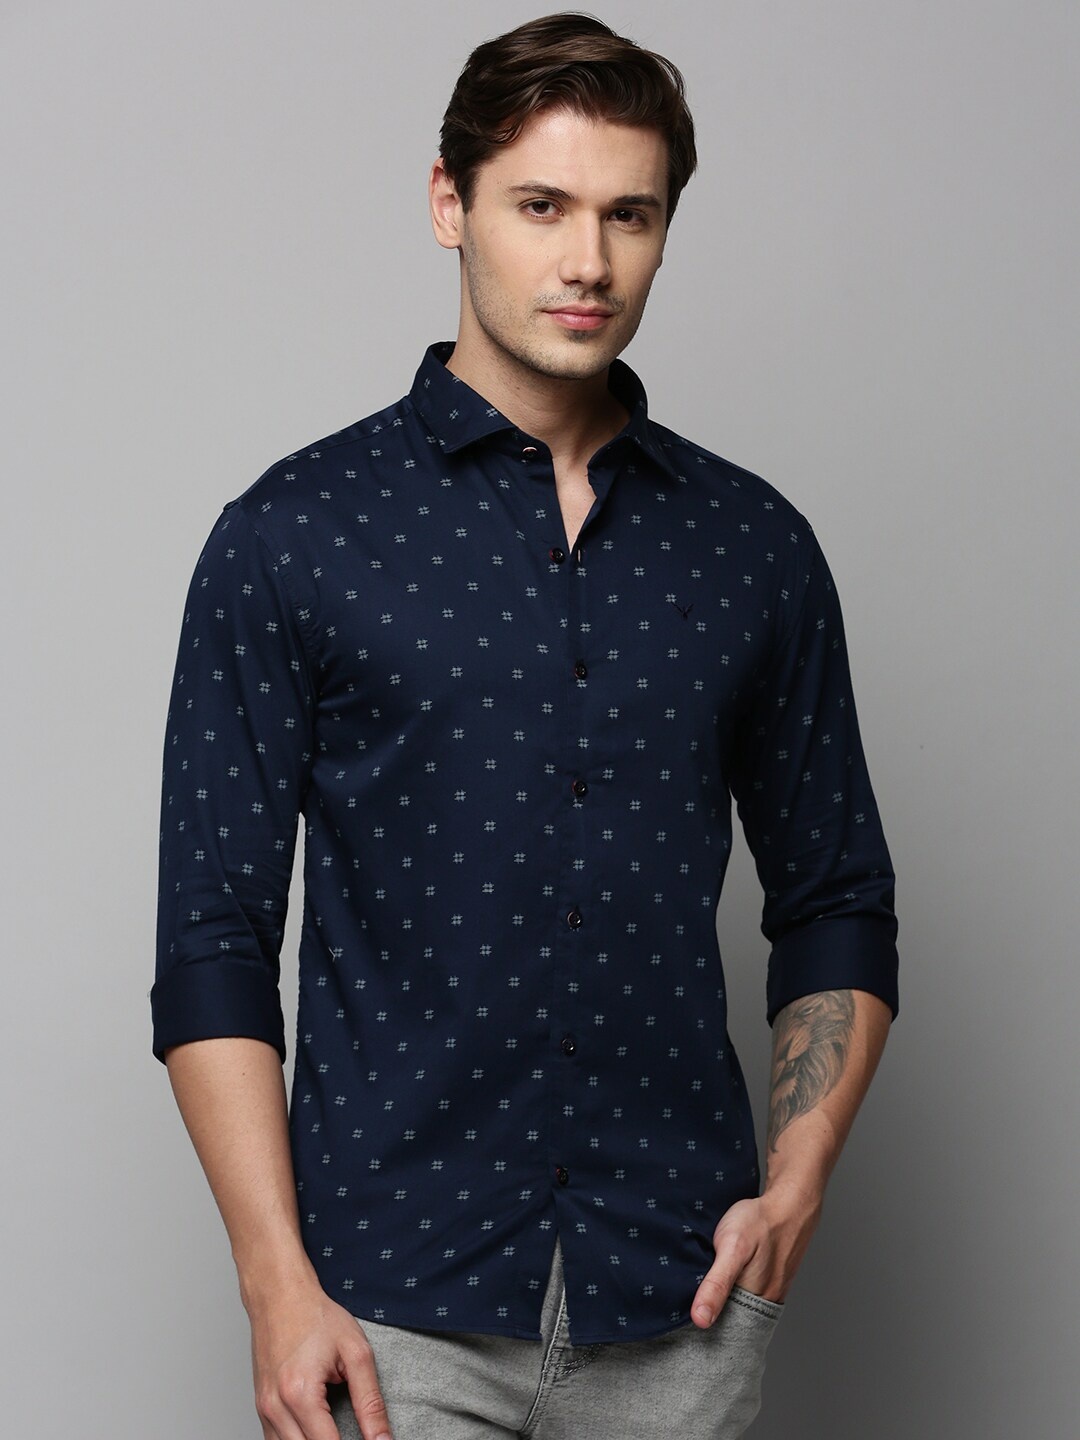 

SHOWOFF Comfort Micro Ditsy Printed Spread Collar Cotton Casual Shirt, Navy blue